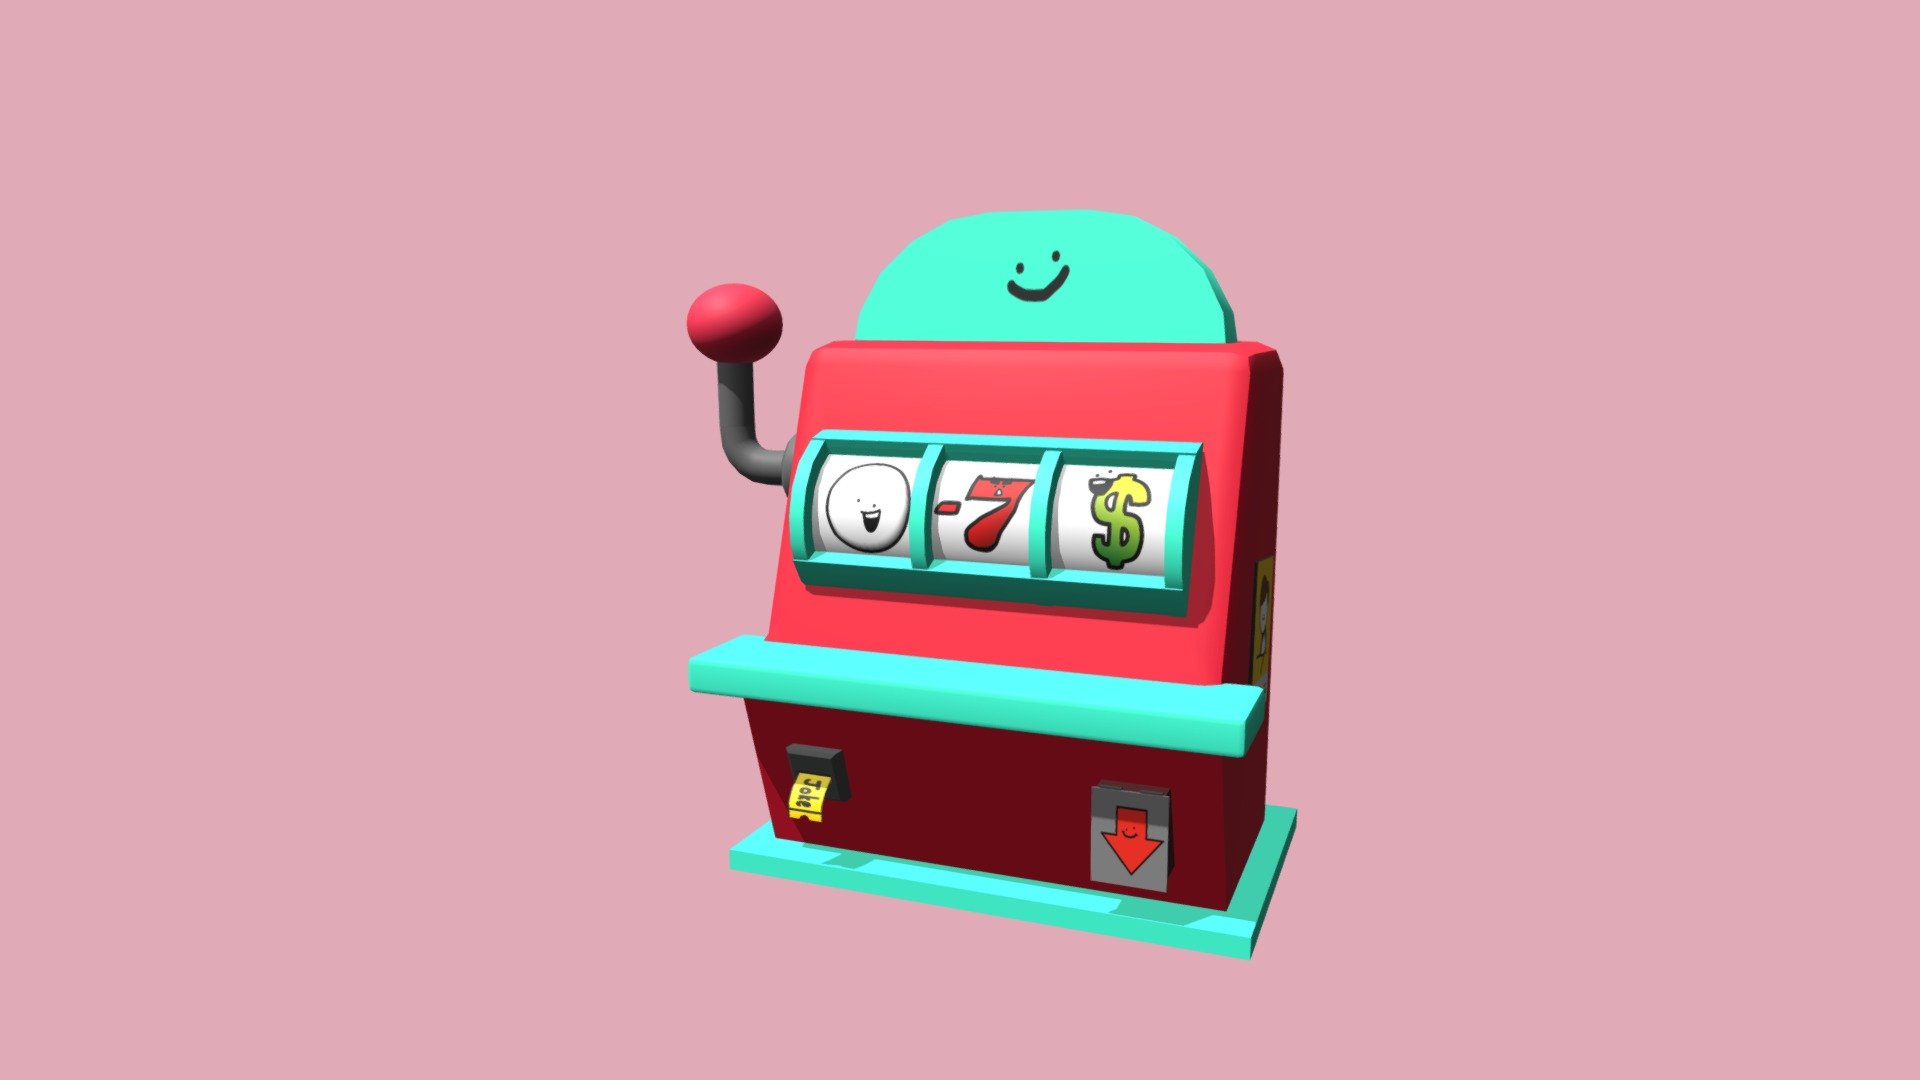 Roll up, roll up, come and see the slot machine with a face! Only takes a collectable to run! - Joke-bot - 3D model by Soup Boy (@SoupBoy) 3d model